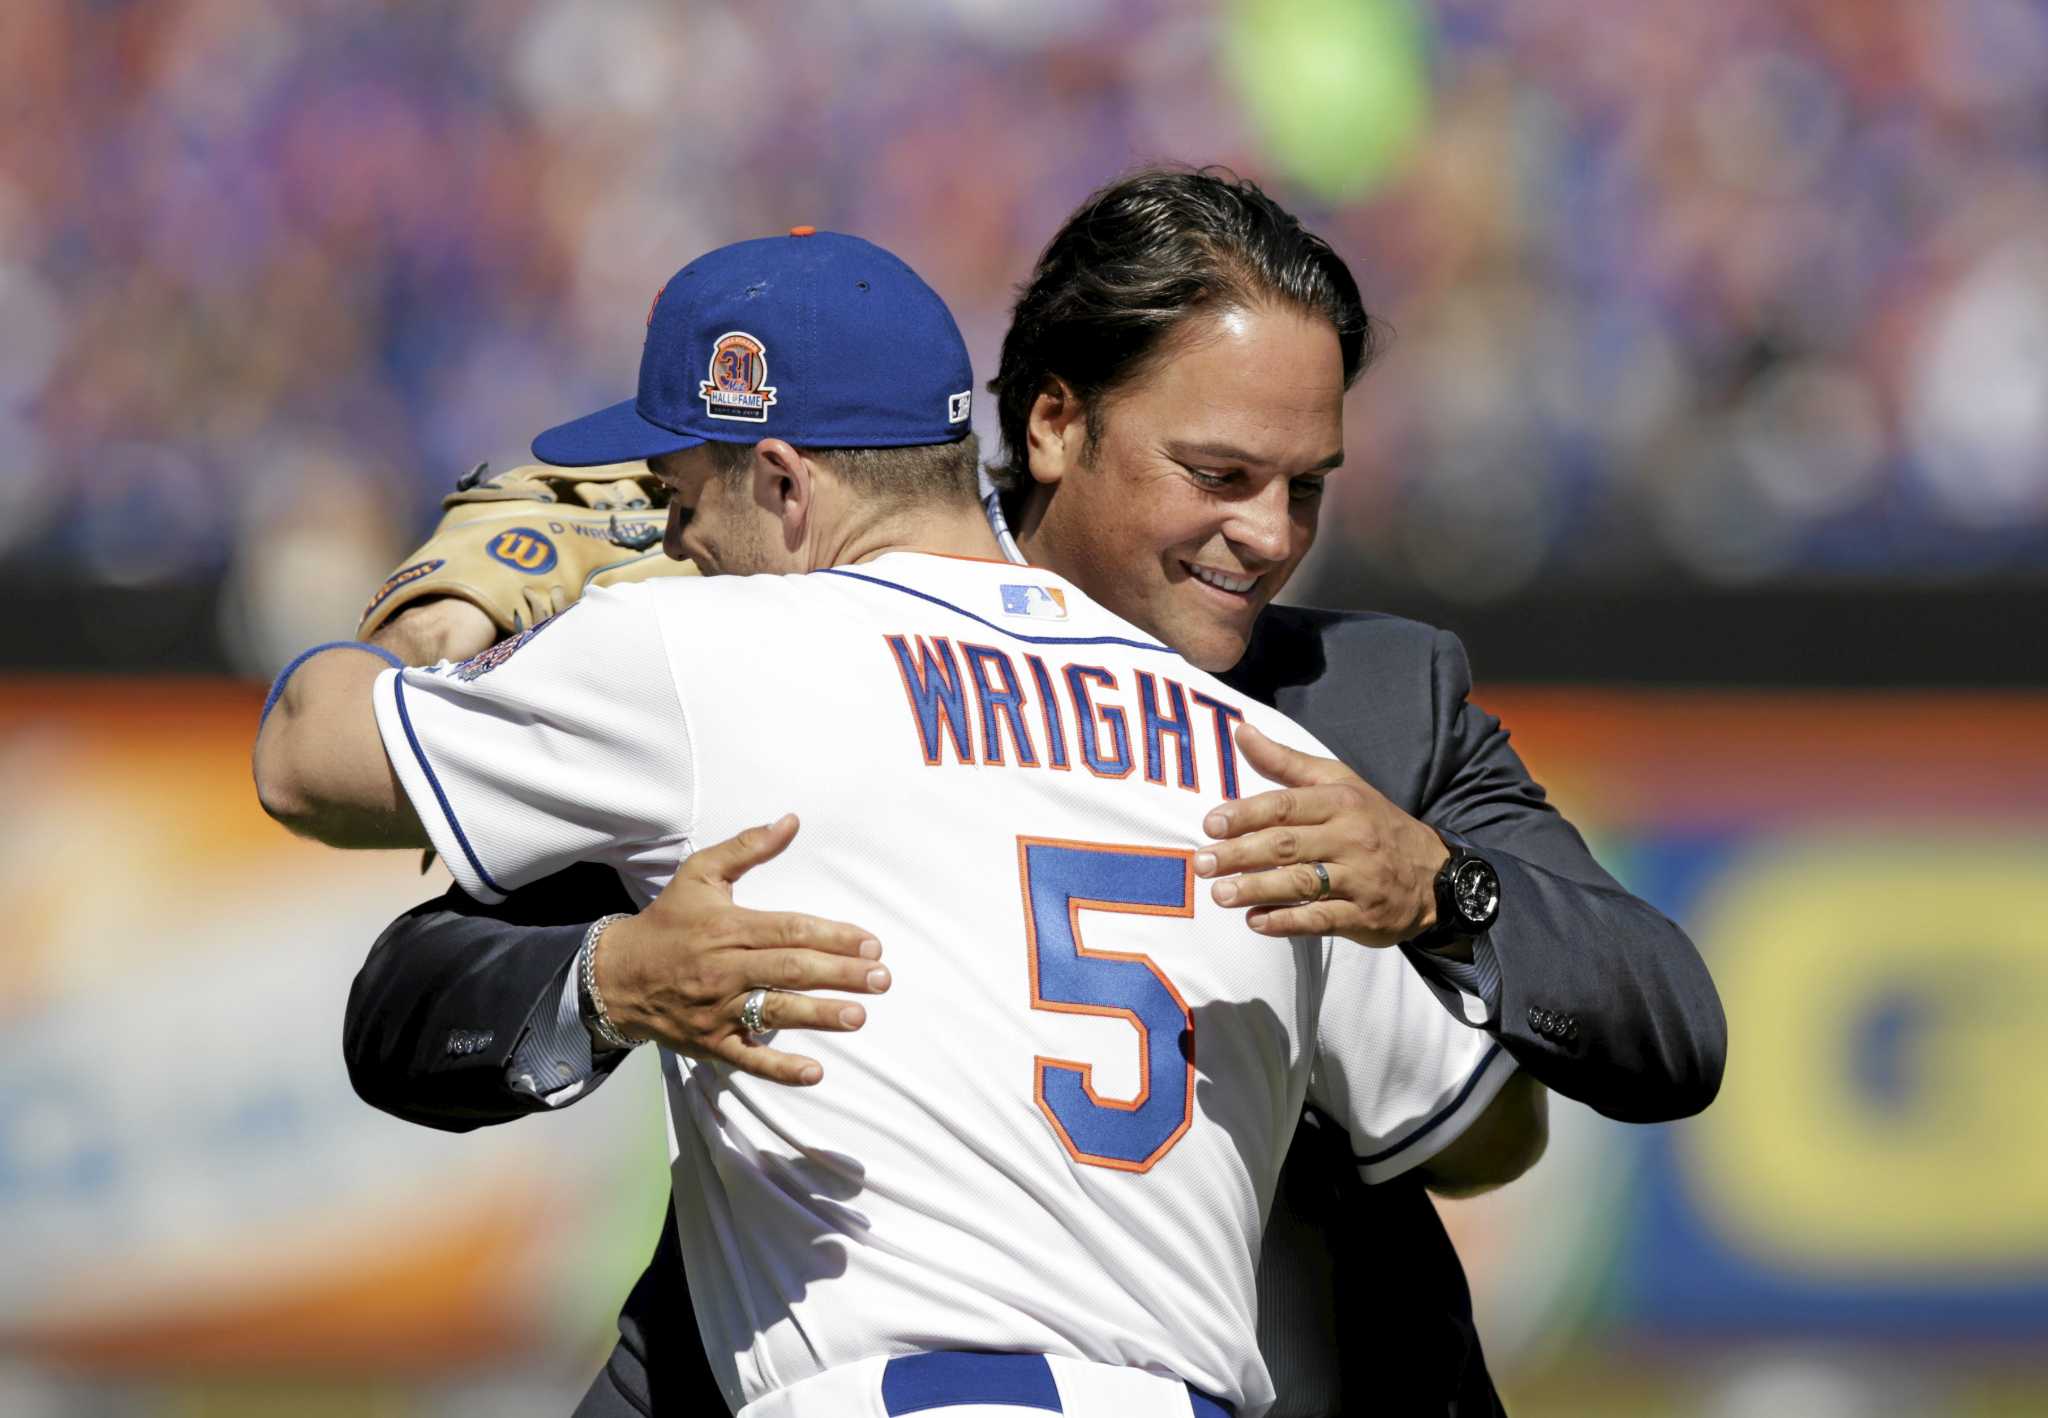 Mets icon Mike Piazza elected to Baseball Hall of Fame